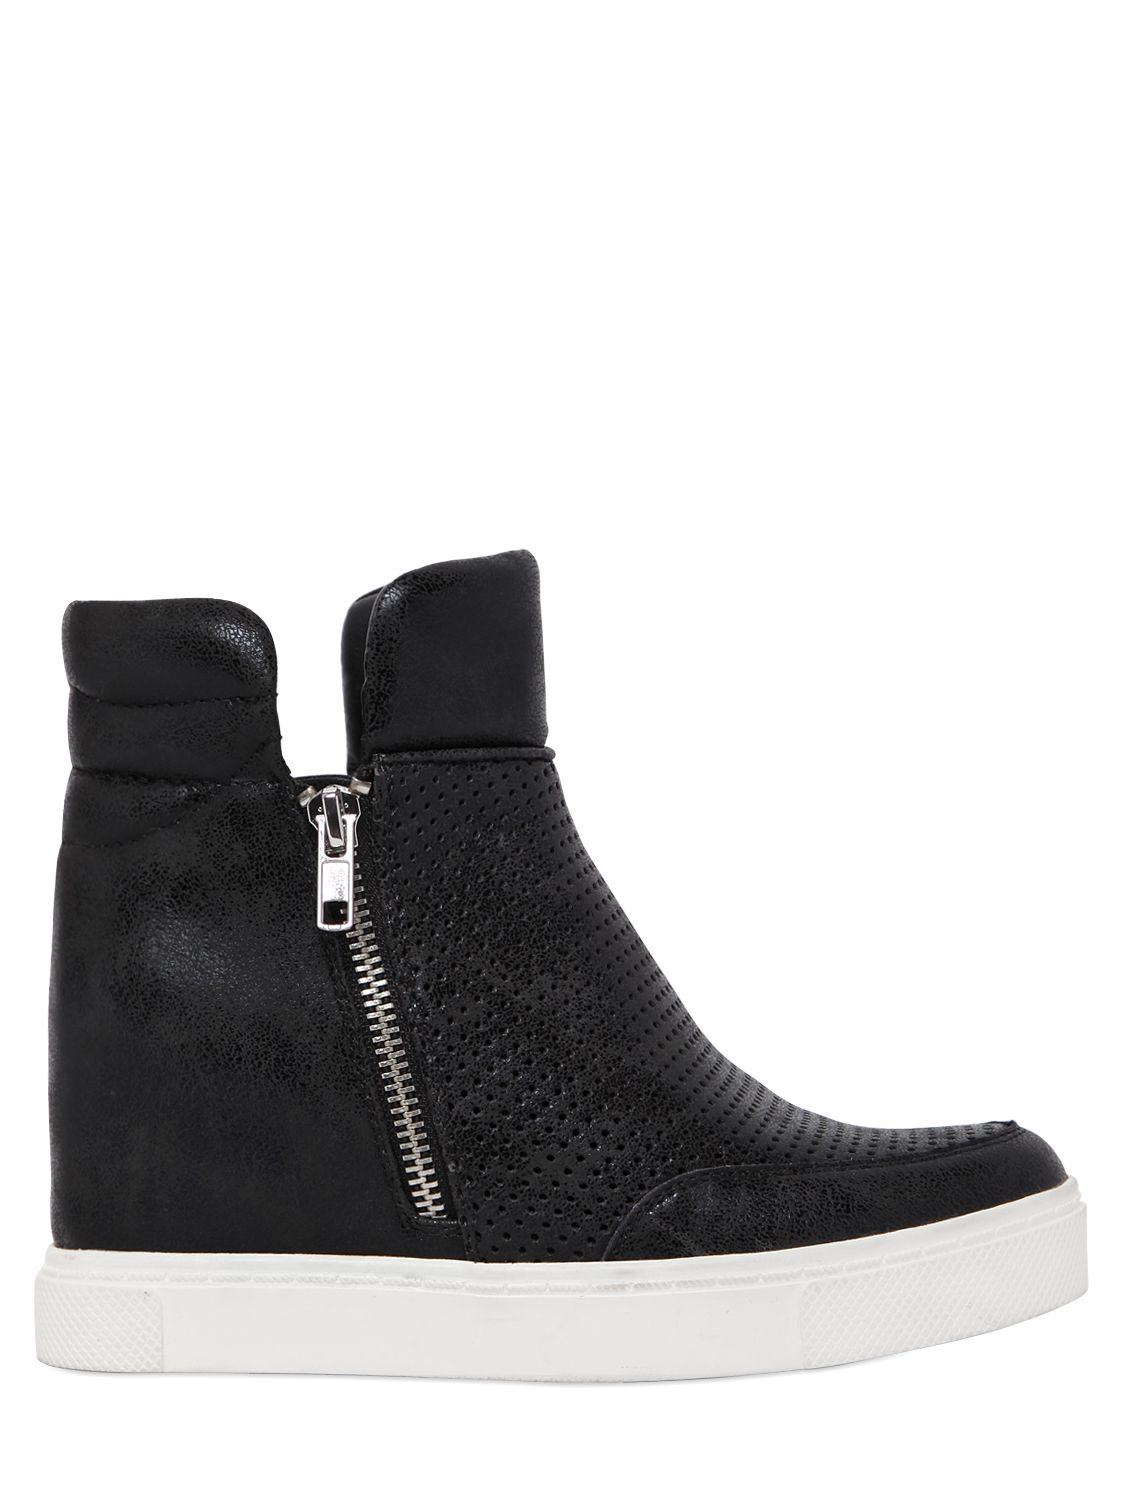 Steve Madden 80mm Perforated Wedge Sneaker Boots in Black - Lyst